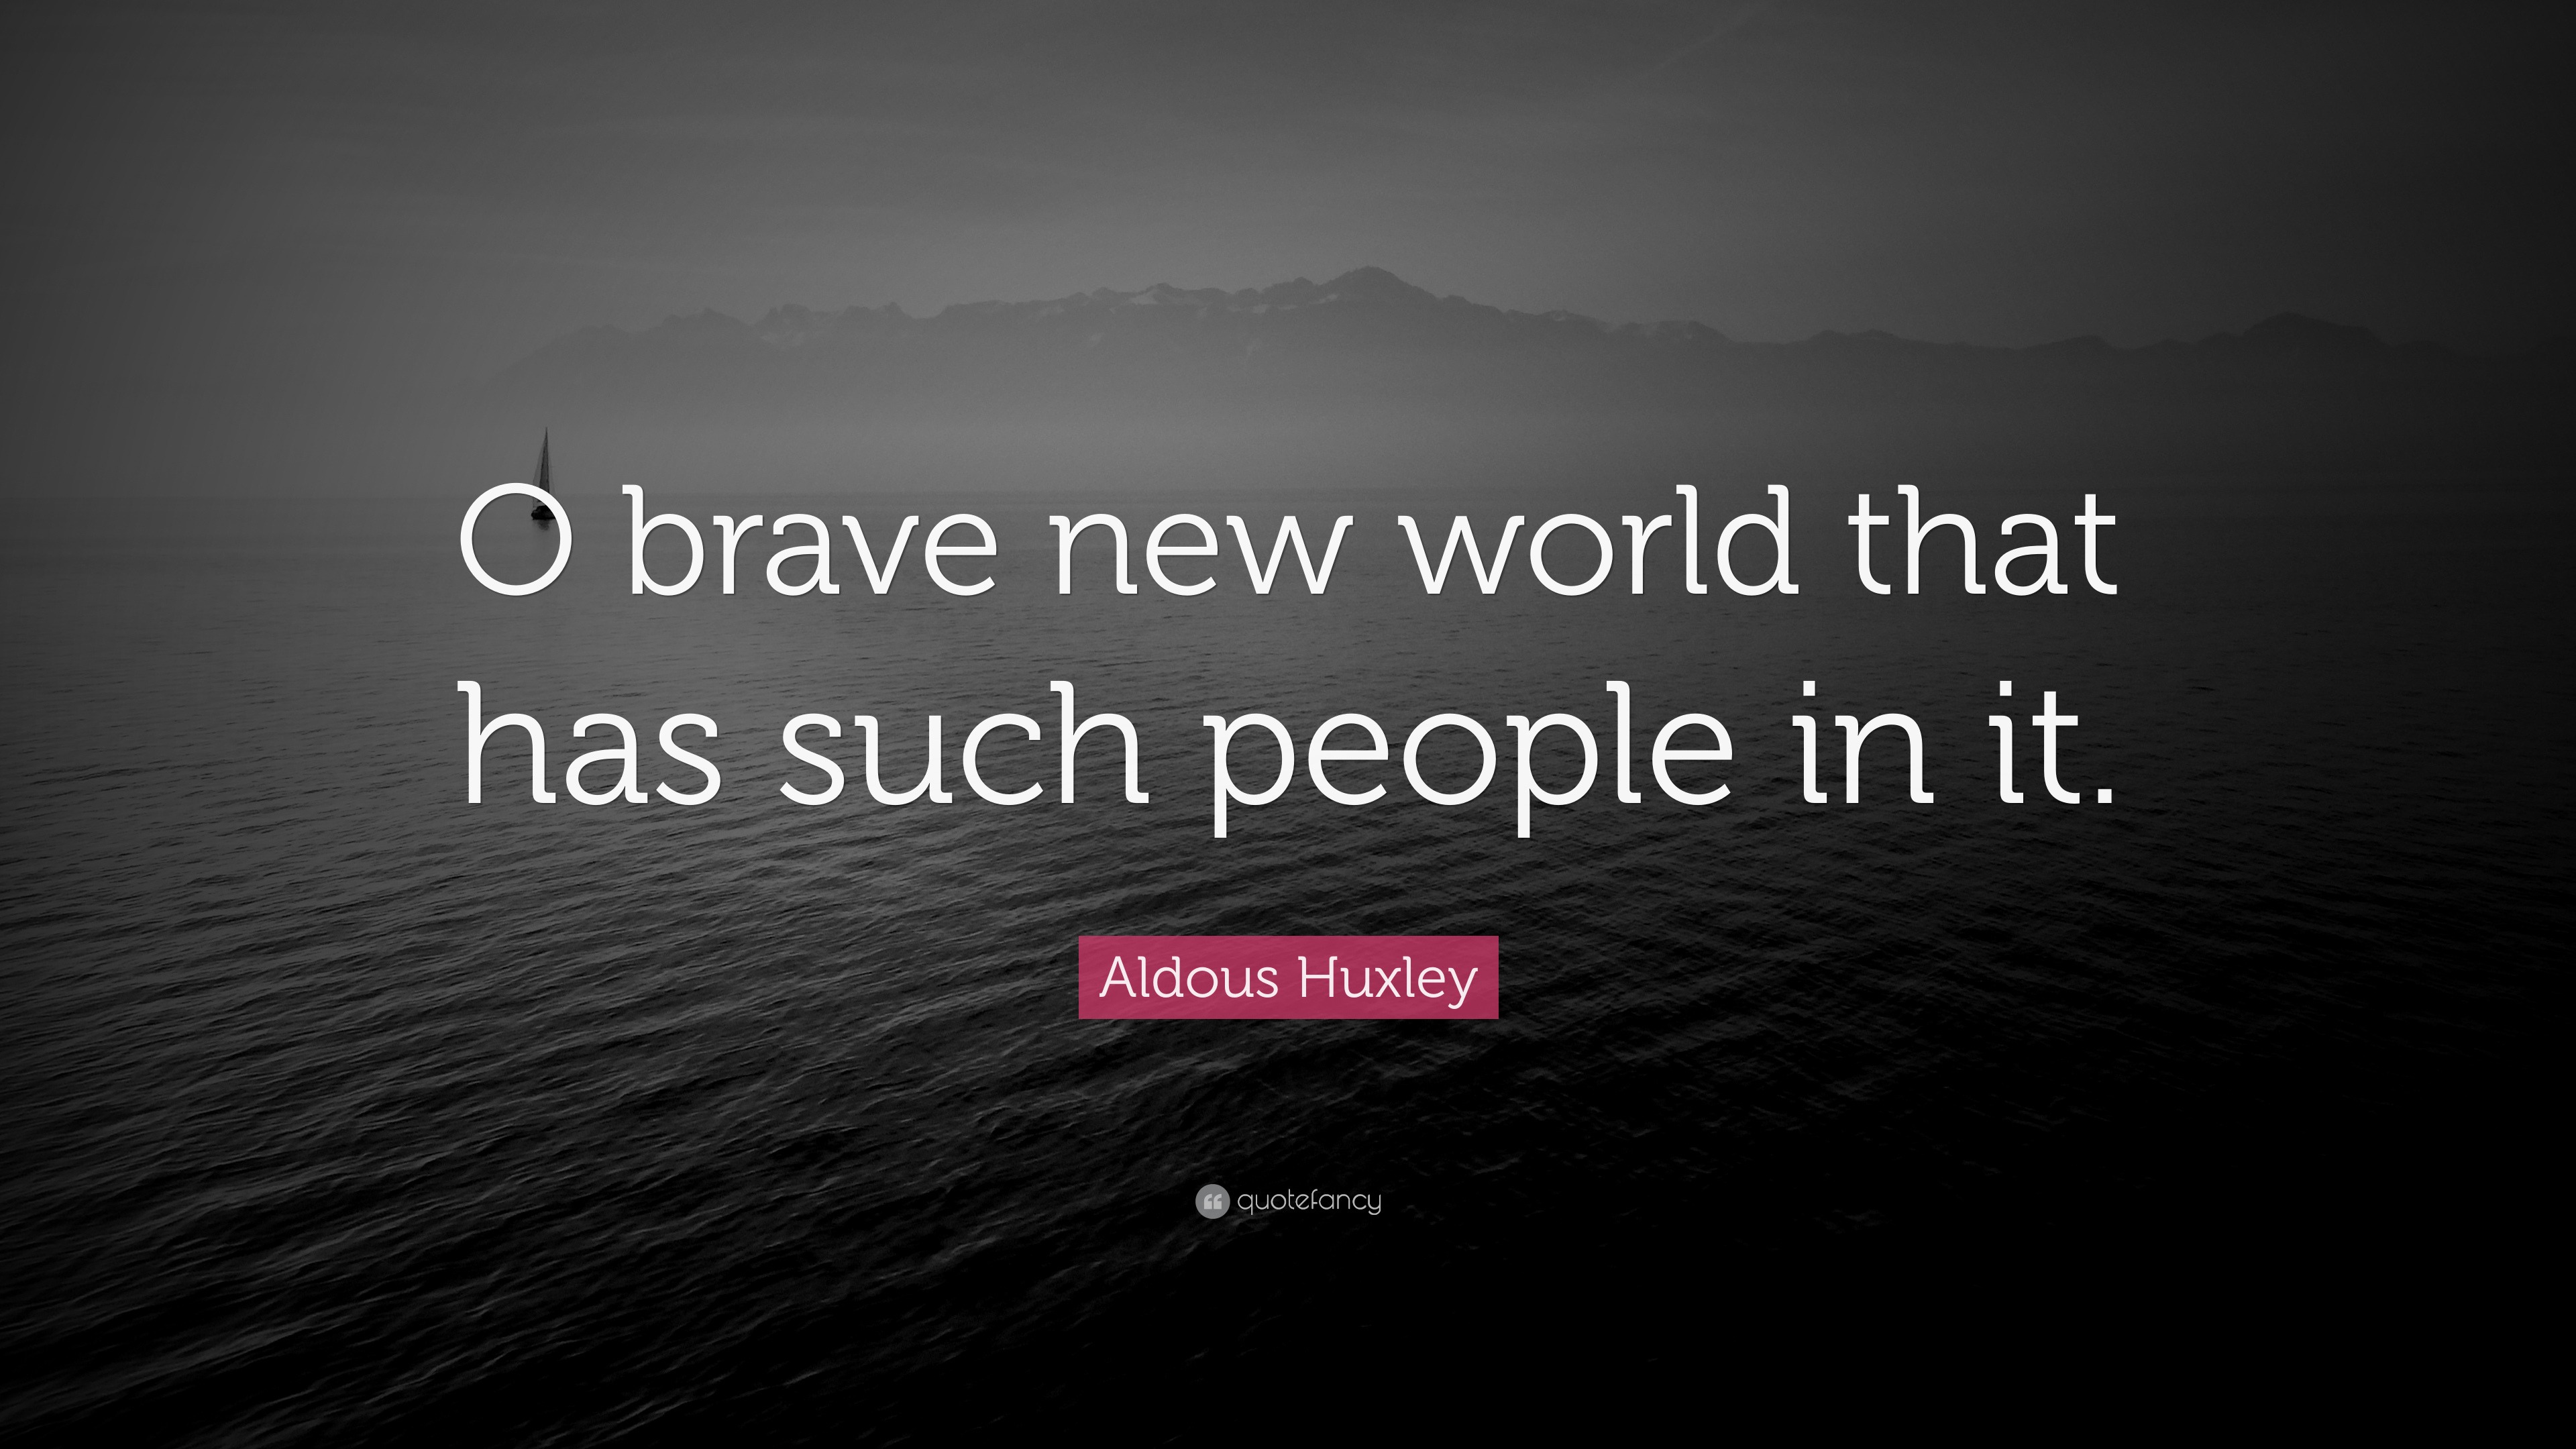 6378076 Aldous Huxley Quote O Brave New World That Has Such People In It 